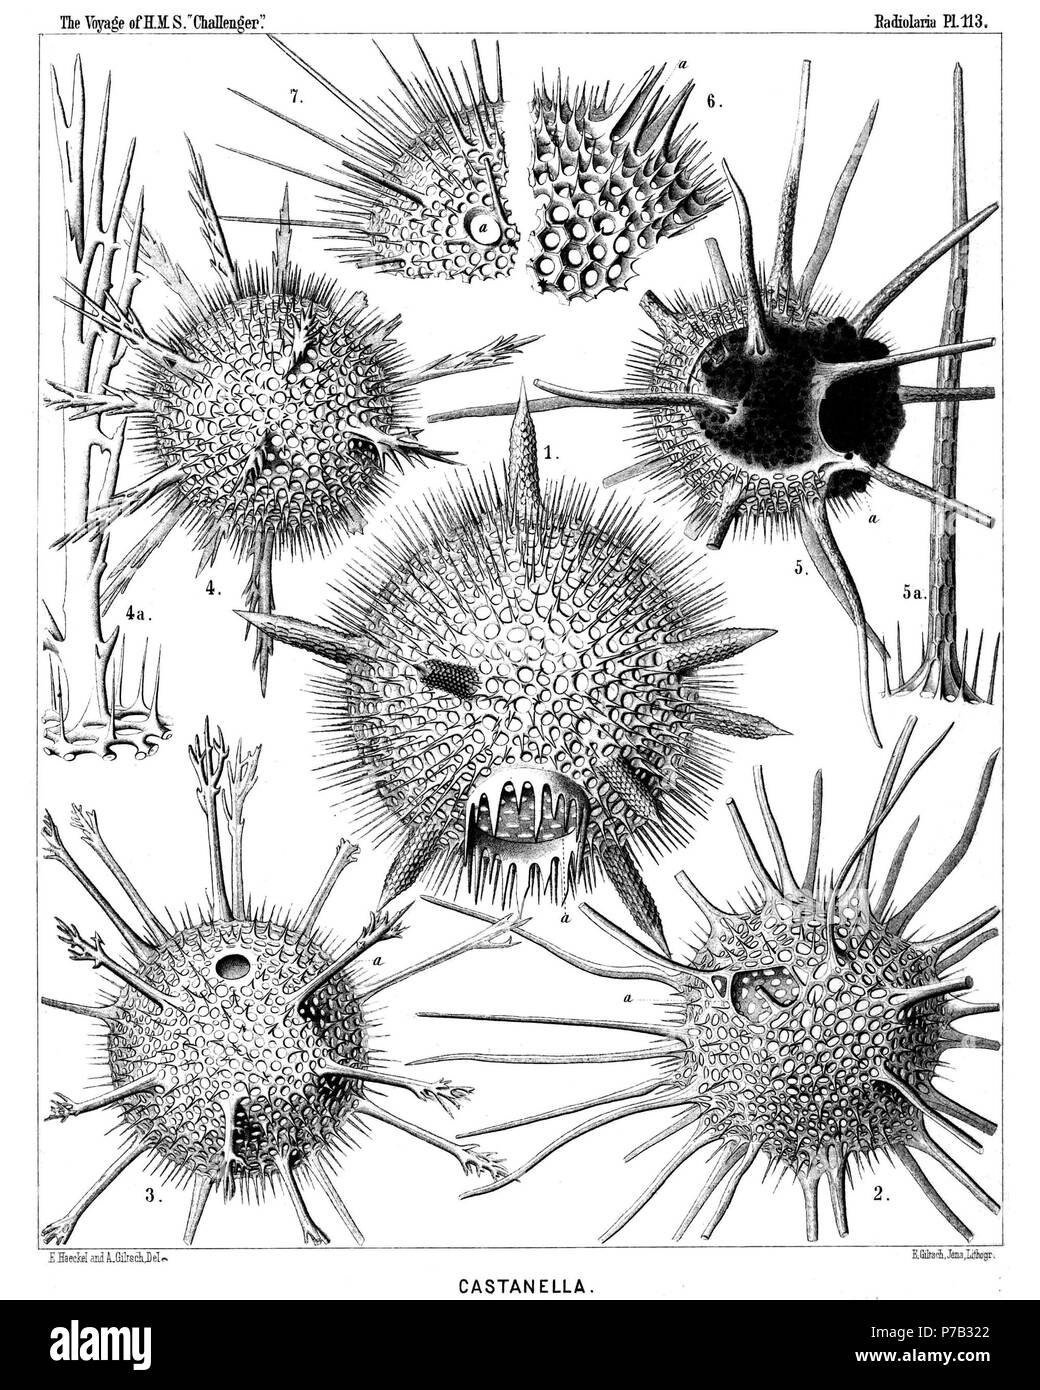 English: Illustration from Report on the Radiolaria collected by H.M.S. Challenger during the years 1873-1876. Part III. Original description follows:  Plate 113. Castanellida.  Diam.  Fig. 1. Castanissa challengeri, n. sp., × 100  In the lower part of the figure is visible the large corona of teeth around the mouth (a).  Fig. 2. Castanidium moseleyi, n. sp., × 80  In the upper part of the figure, at left, is visible the irregular polygonal mouth (a).  Fig. 3. Castanopsis naresi, n. sp., × 80  In the upper part of the figure is visible the smooth circular mouth (a).  Fig. 4. Castanura tizardi, Stock Photo